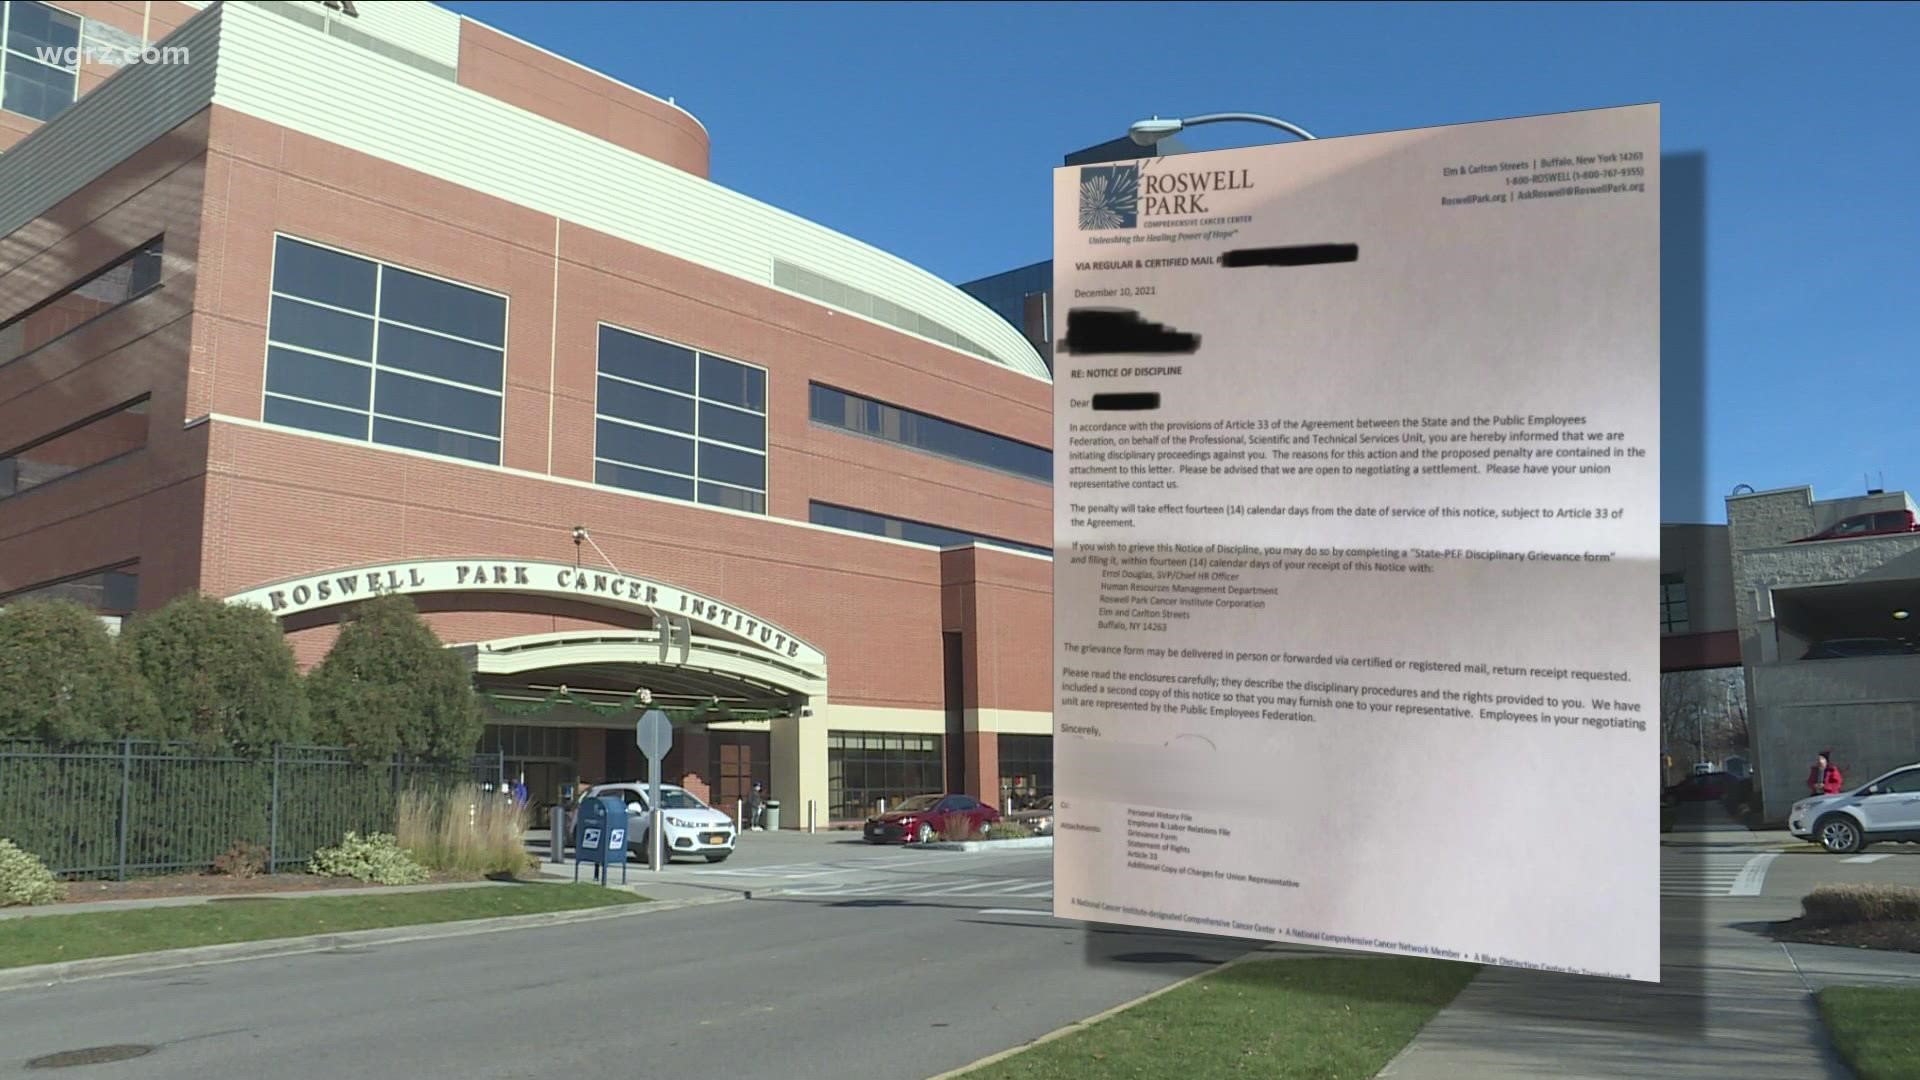 A letter being shared on social media is leading some people to conclude that hospitals who had fired unvaccinated workers, are now punishing those workers.